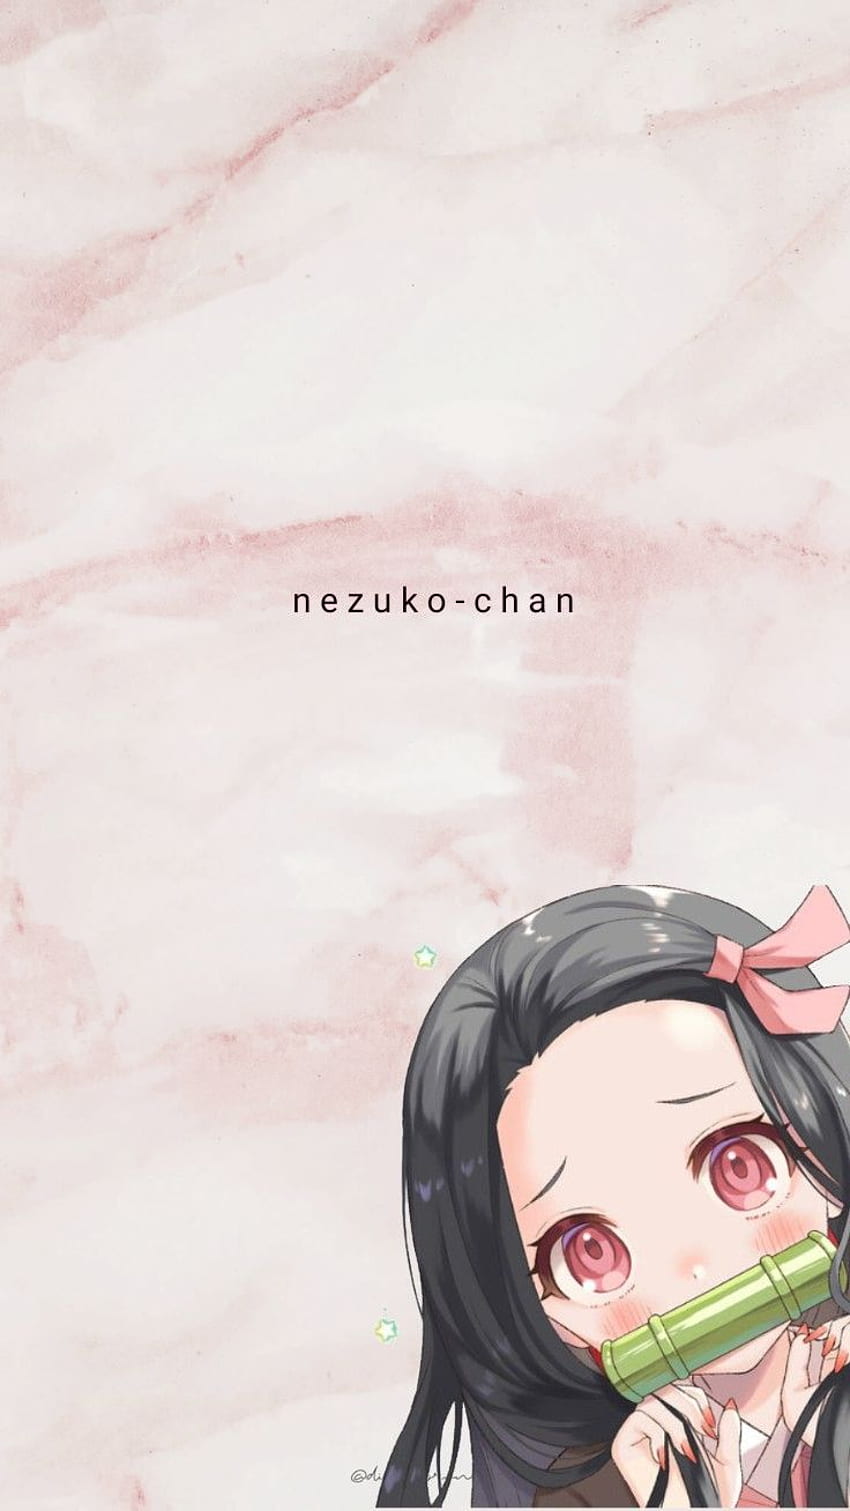 ♧𝓦𝓪𝓵𝓵𝓹𝓪𝓹𝓮𝓻♥ | Cute wallpapers, Aesthetic anime, Anime background